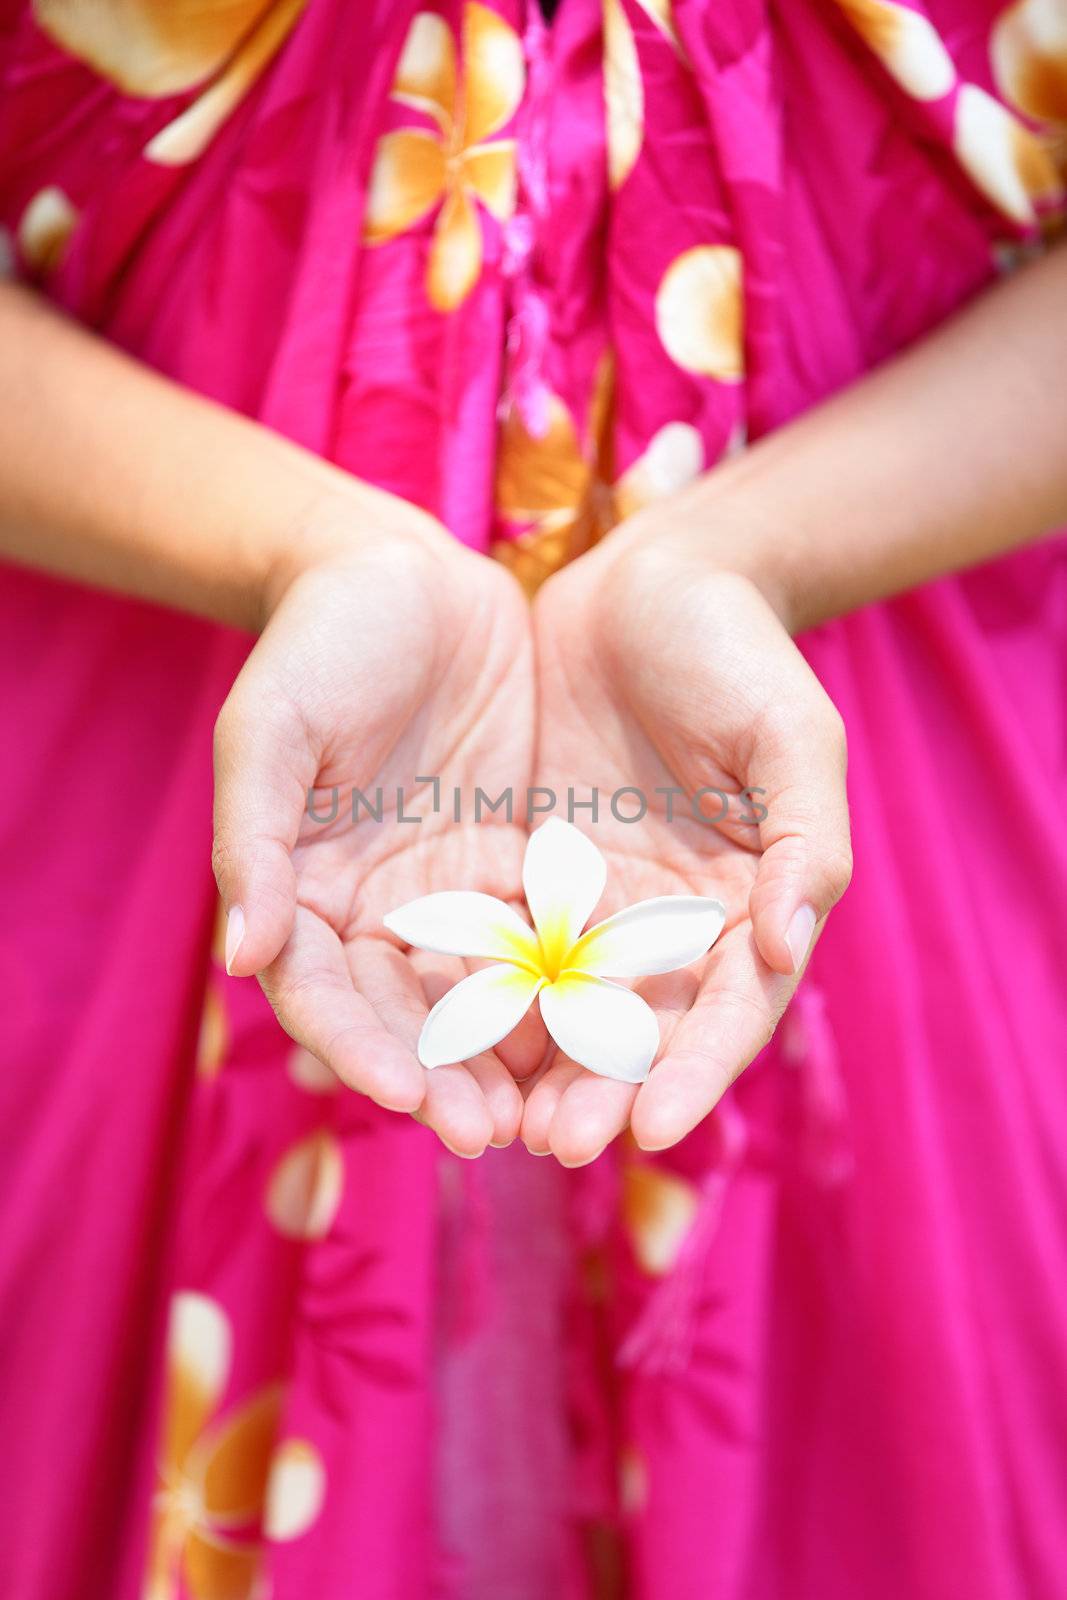 Hawaiian flower in cupped hands of woman wearing sarong. Hawaii concept with typical Plumeria flowers.